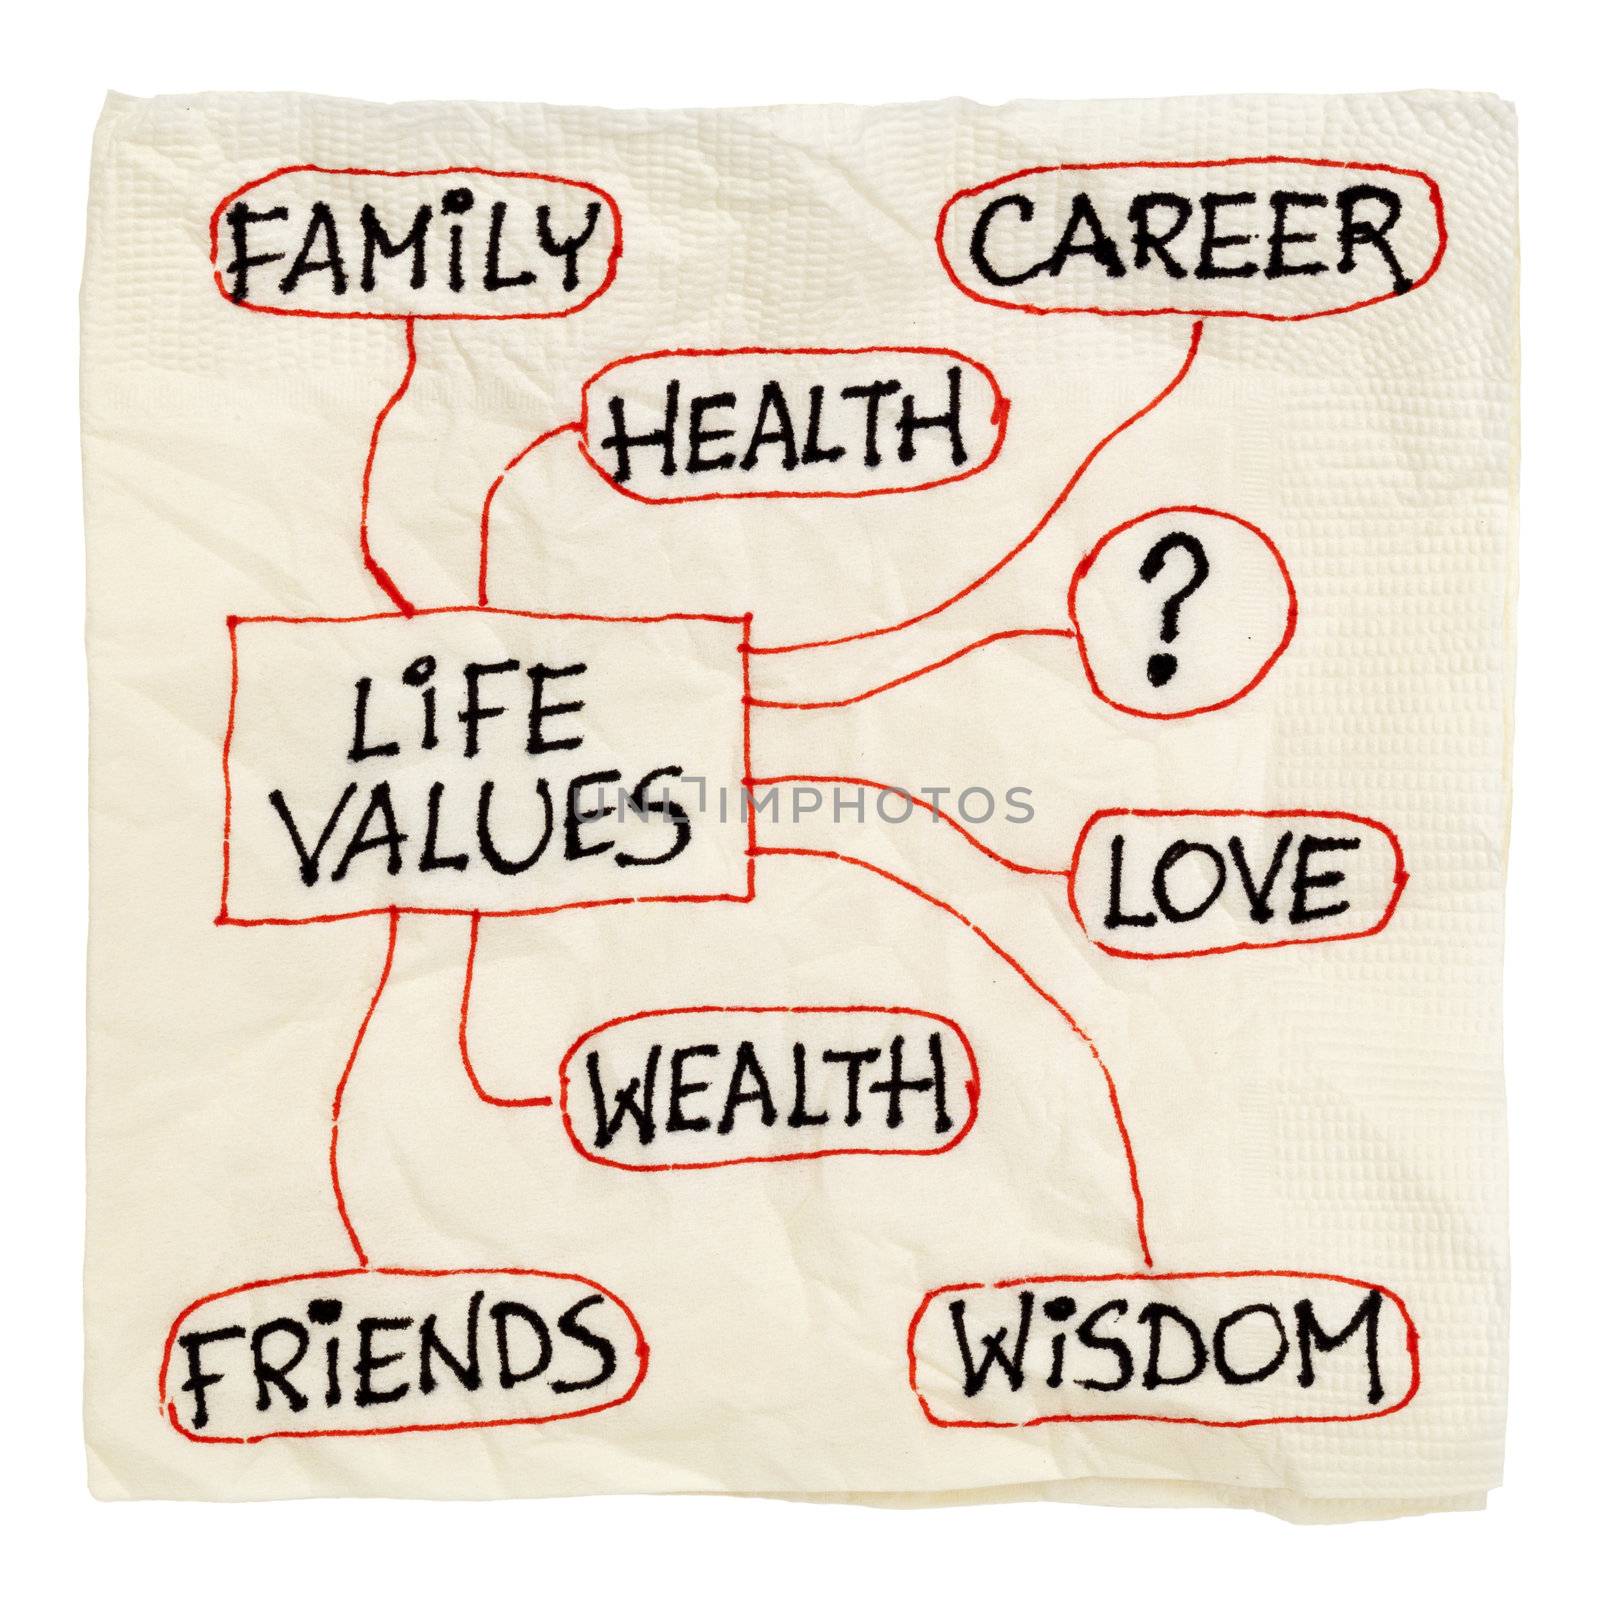 napkin sketch of possible life values  - career, family, wealth, love, friends, health, wisdom, isolated on white